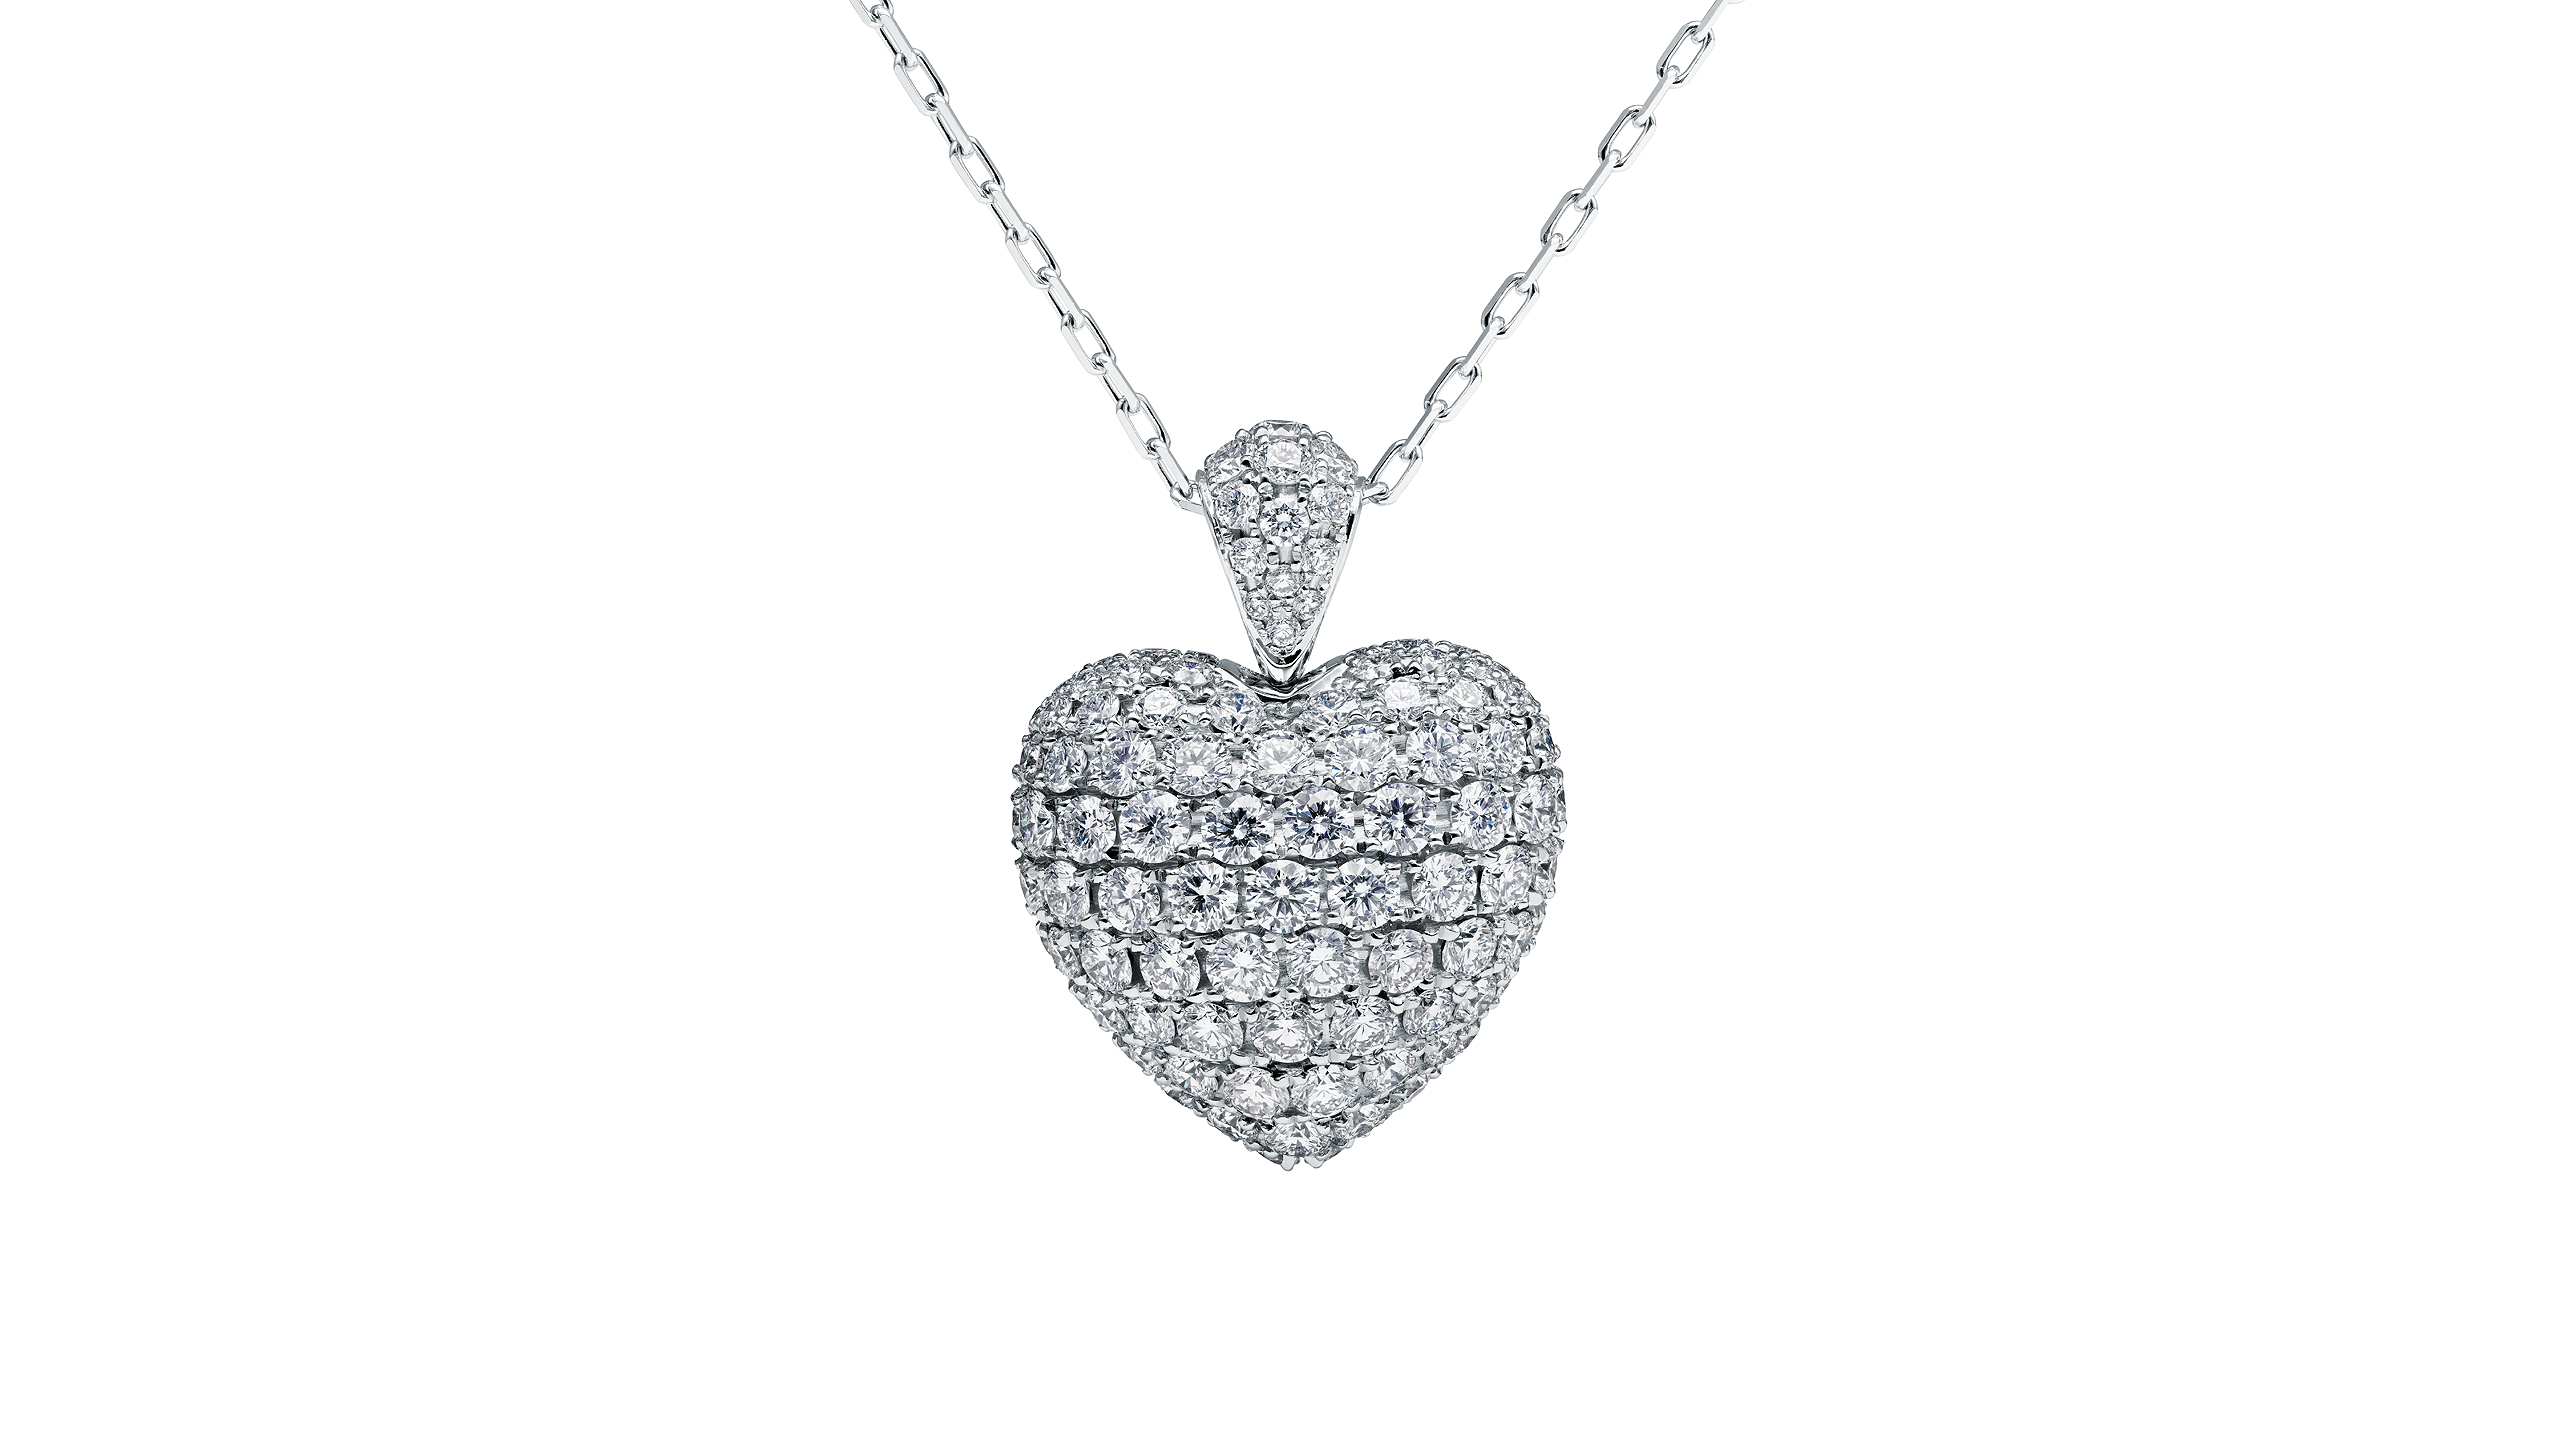 https://towejewels.com/wp-content/uploads/2015/06/Diamond_heart_Medium_front_ny_OK_AB_2560x1440_overview_web.jpg